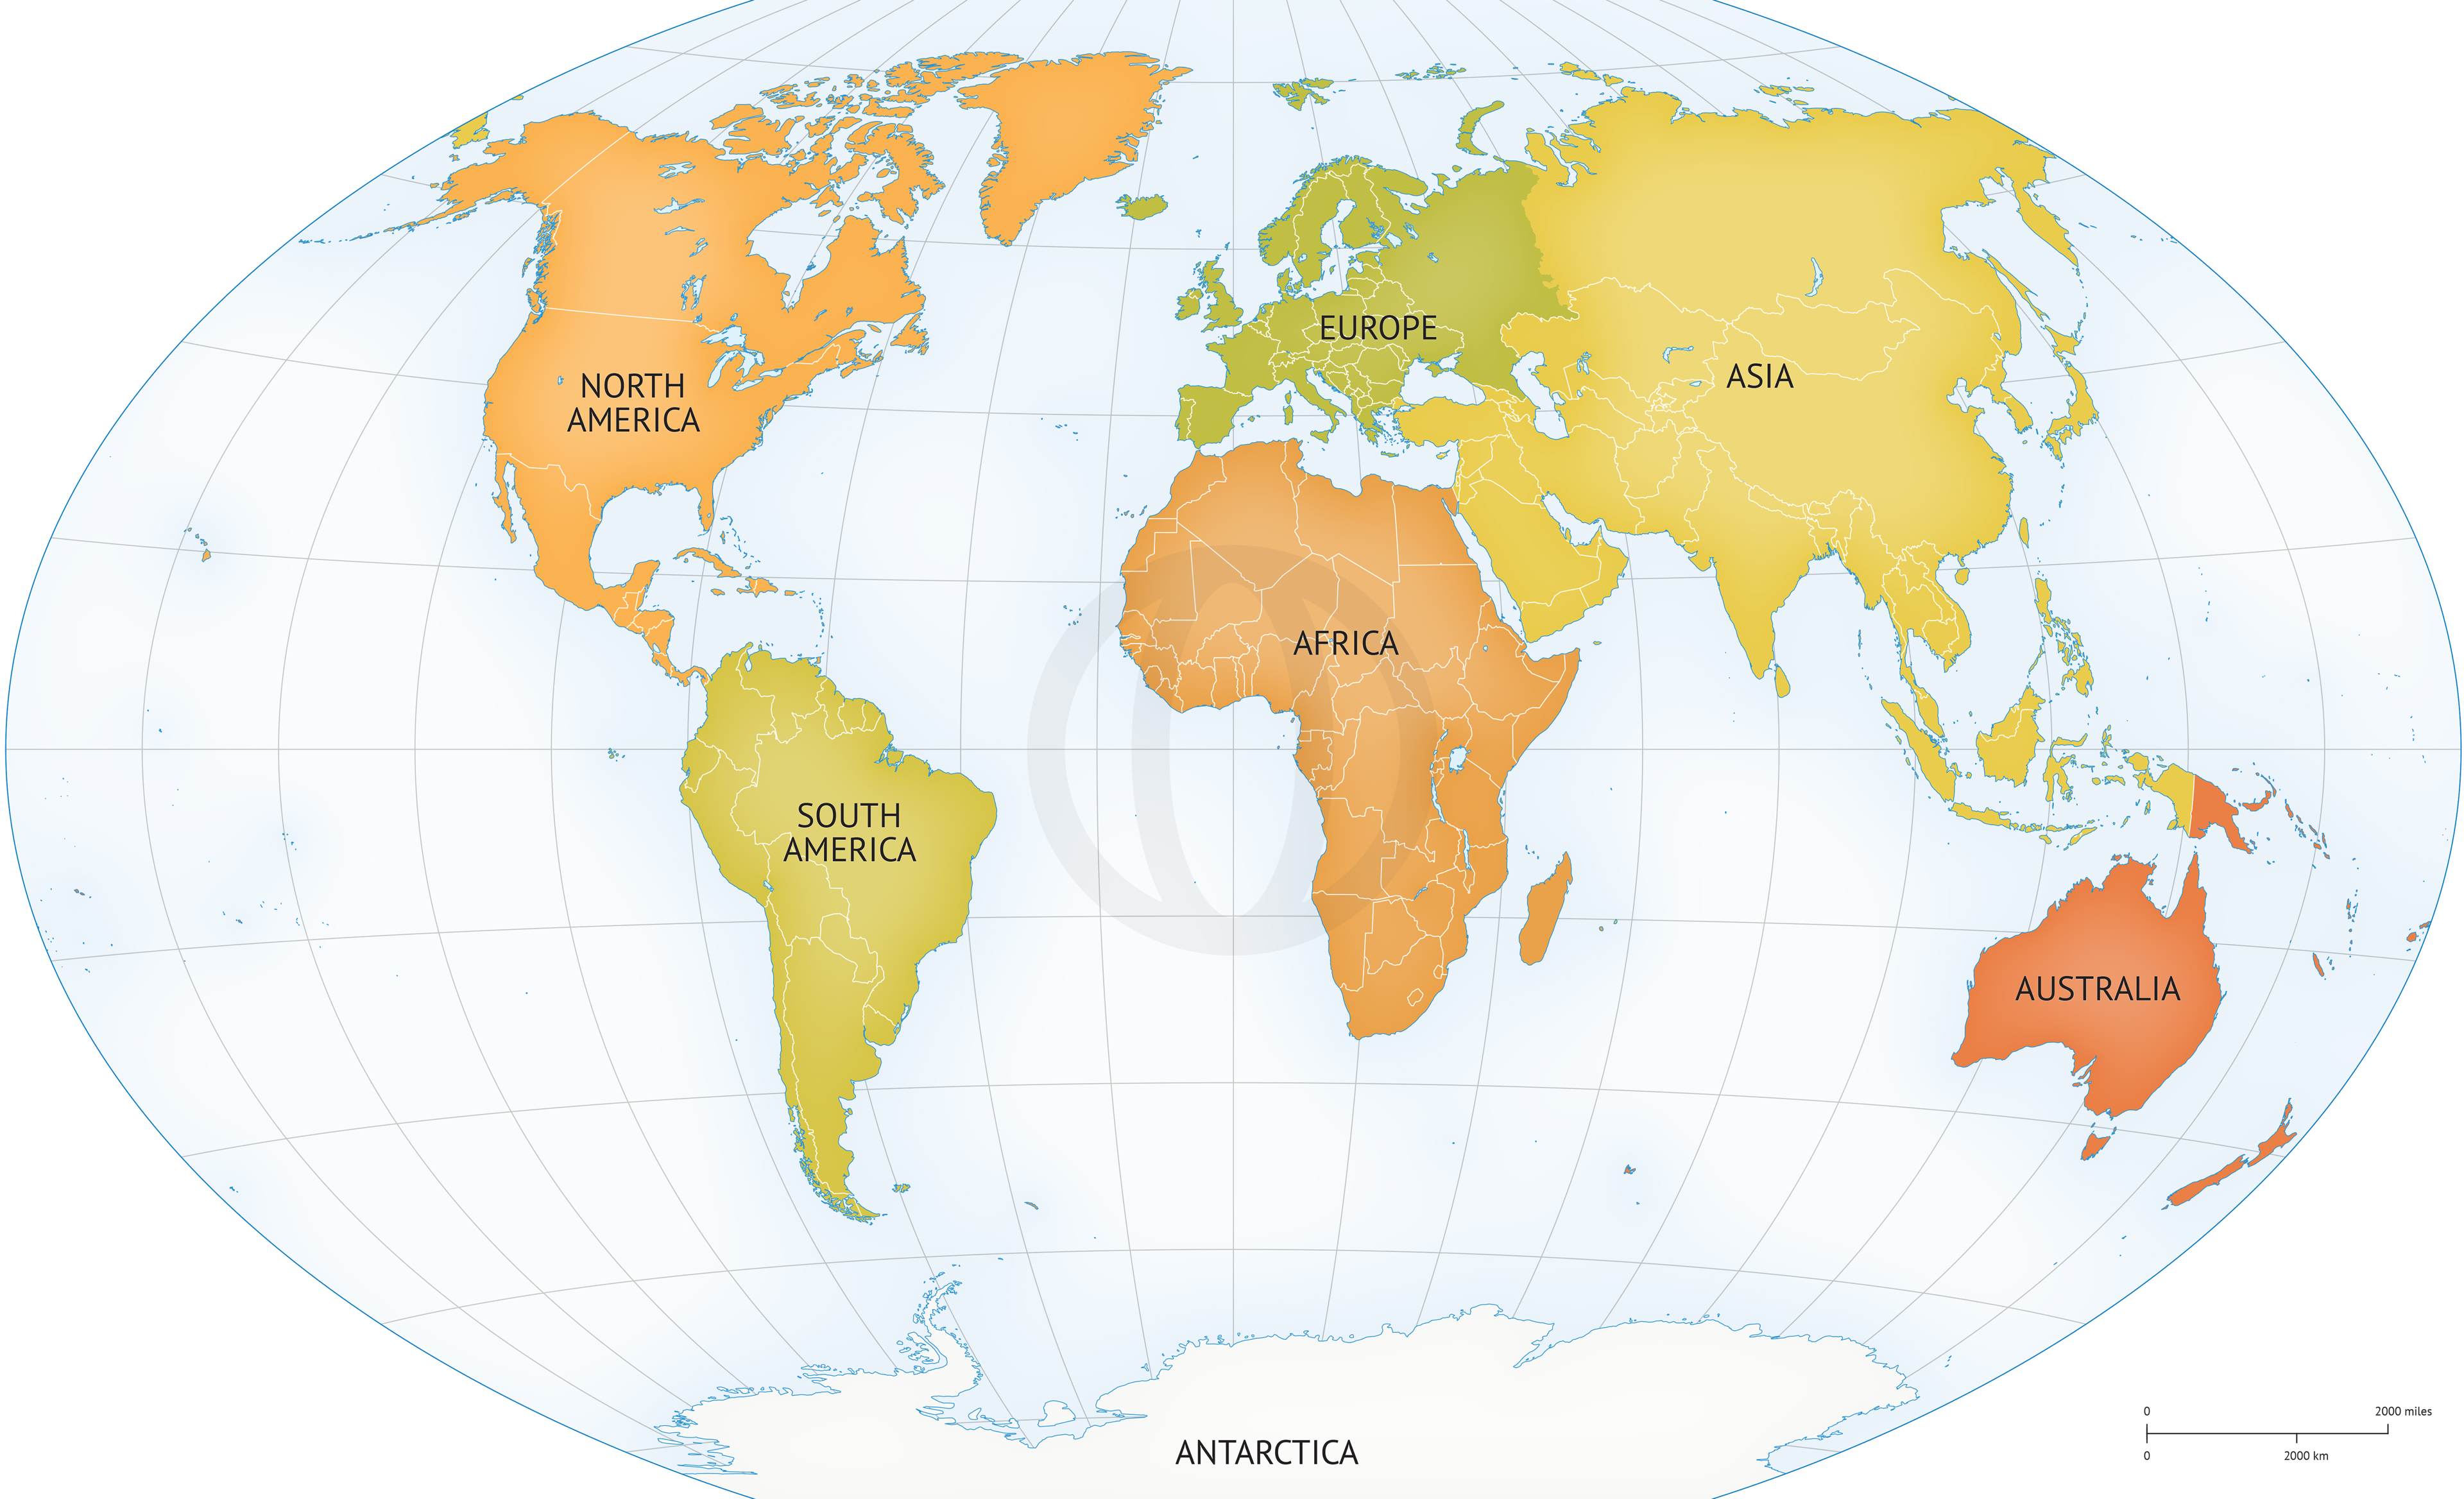 word-world-political-map-showing-continents-and-oceans-images-and